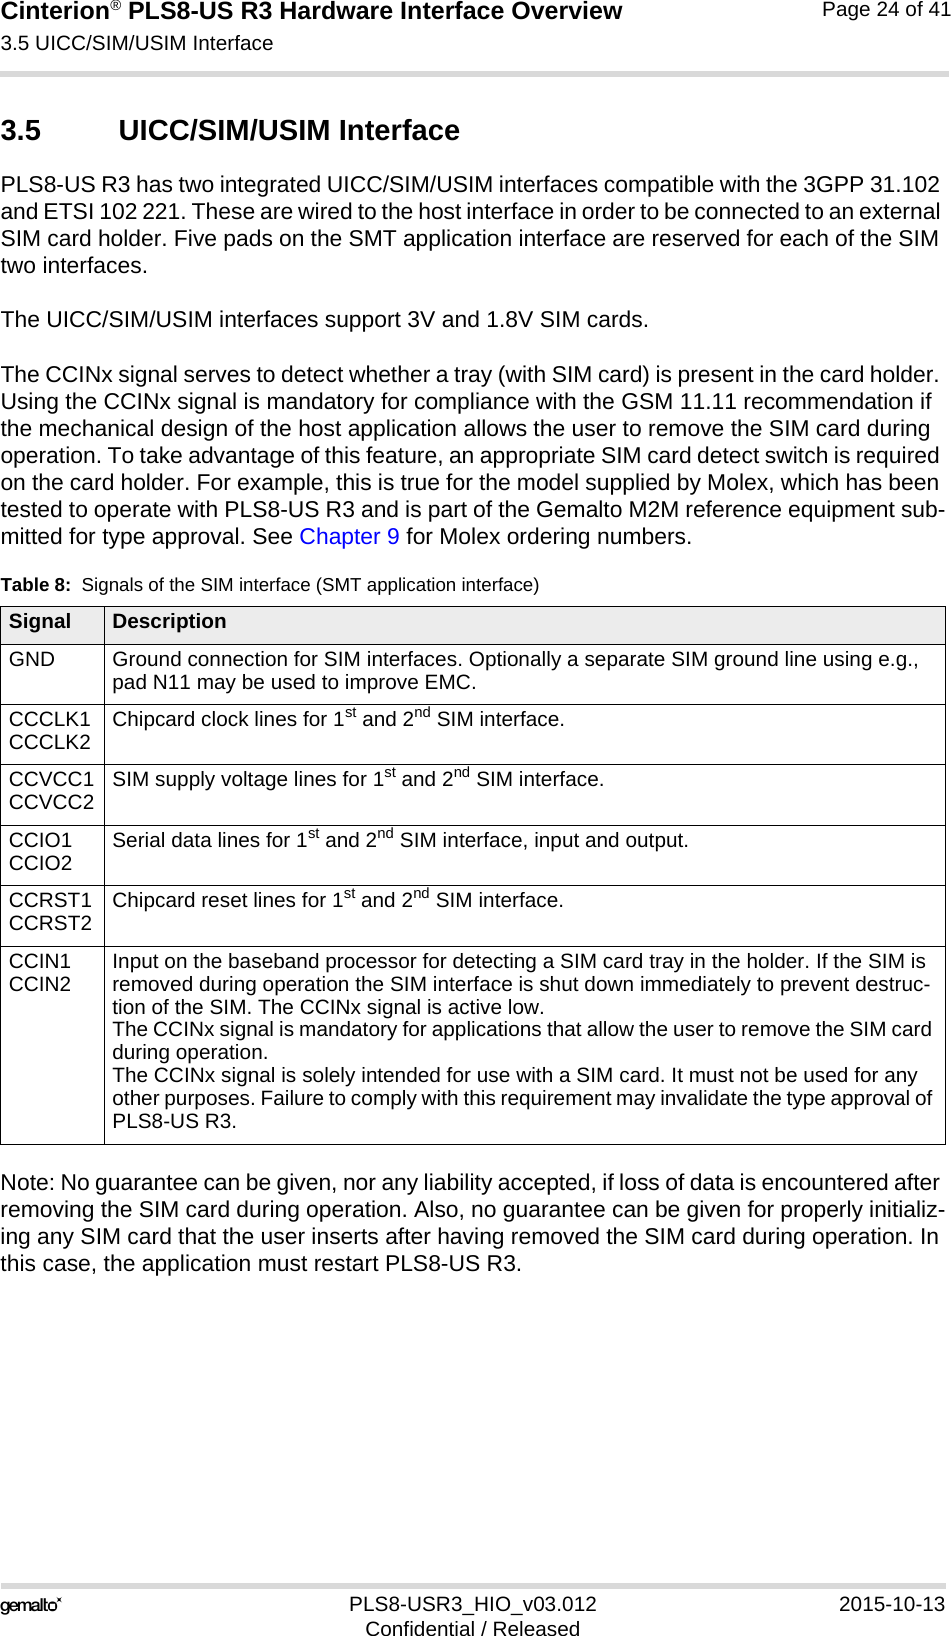 Cinterion® PLS8-US R3 Hardware Interface Overview3.5 UICC/SIM/USIM Interface27PLS8-USR3_HIO_v03.012 2015-10-13Confidential / ReleasedPage 24 of 413.5 UICC/SIM/USIM InterfacePLS8-US R3 has two integrated UICC/SIM/USIM interfaces compatible with the 3GPP 31.102 and ETSI 102 221. These are wired to the host interface in order to be connected to an external SIM card holder. Five pads on the SMT application interface are reserved for each of the SIM two interfaces. The UICC/SIM/USIM interfaces support 3V and 1.8V SIM cards. The CCINx signal serves to detect whether a tray (with SIM card) is present in the card holder. Using the CCINx signal is mandatory for compliance with the GSM 11.11 recommendation if the mechanical design of the host application allows the user to remove the SIM card during operation. To take advantage of this feature, an appropriate SIM card detect switch is required on the card holder. For example, this is true for the model supplied by Molex, which has been tested to operate with PLS8-US R3 and is part of the Gemalto M2M reference equipment sub-mitted for type approval. See Chapter 9 for Molex ordering numbers.Note: No guarantee can be given, nor any liability accepted, if loss of data is encountered after removing the SIM card during operation. Also, no guarantee can be given for properly initializ-ing any SIM card that the user inserts after having removed the SIM card during operation. In this case, the application must restart PLS8-US R3.Table 8:  Signals of the SIM interface (SMT application interface)Signal DescriptionGND Ground connection for SIM interfaces. Optionally a separate SIM ground line using e.g., pad N11 may be used to improve EMC.CCCLK1CCCLK2 Chipcard clock lines for 1st and 2nd SIM interface.CCVCC1CCVCC2 SIM supply voltage lines for 1st and 2nd SIM interface.CCIO1CCIO2 Serial data lines for 1st and 2nd SIM interface, input and output.CCRST1CCRST2 Chipcard reset lines for 1st and 2nd SIM interface.CCIN1CCIN2 Input on the baseband processor for detecting a SIM card tray in the holder. If the SIM is removed during operation the SIM interface is shut down immediately to prevent destruc-tion of the SIM. The CCINx signal is active low.The CCINx signal is mandatory for applications that allow the user to remove the SIM card during operation. The CCINx signal is solely intended for use with a SIM card. It must not be used for any other purposes. Failure to comply with this requirement may invalidate the type approval of PLS8-US R3.